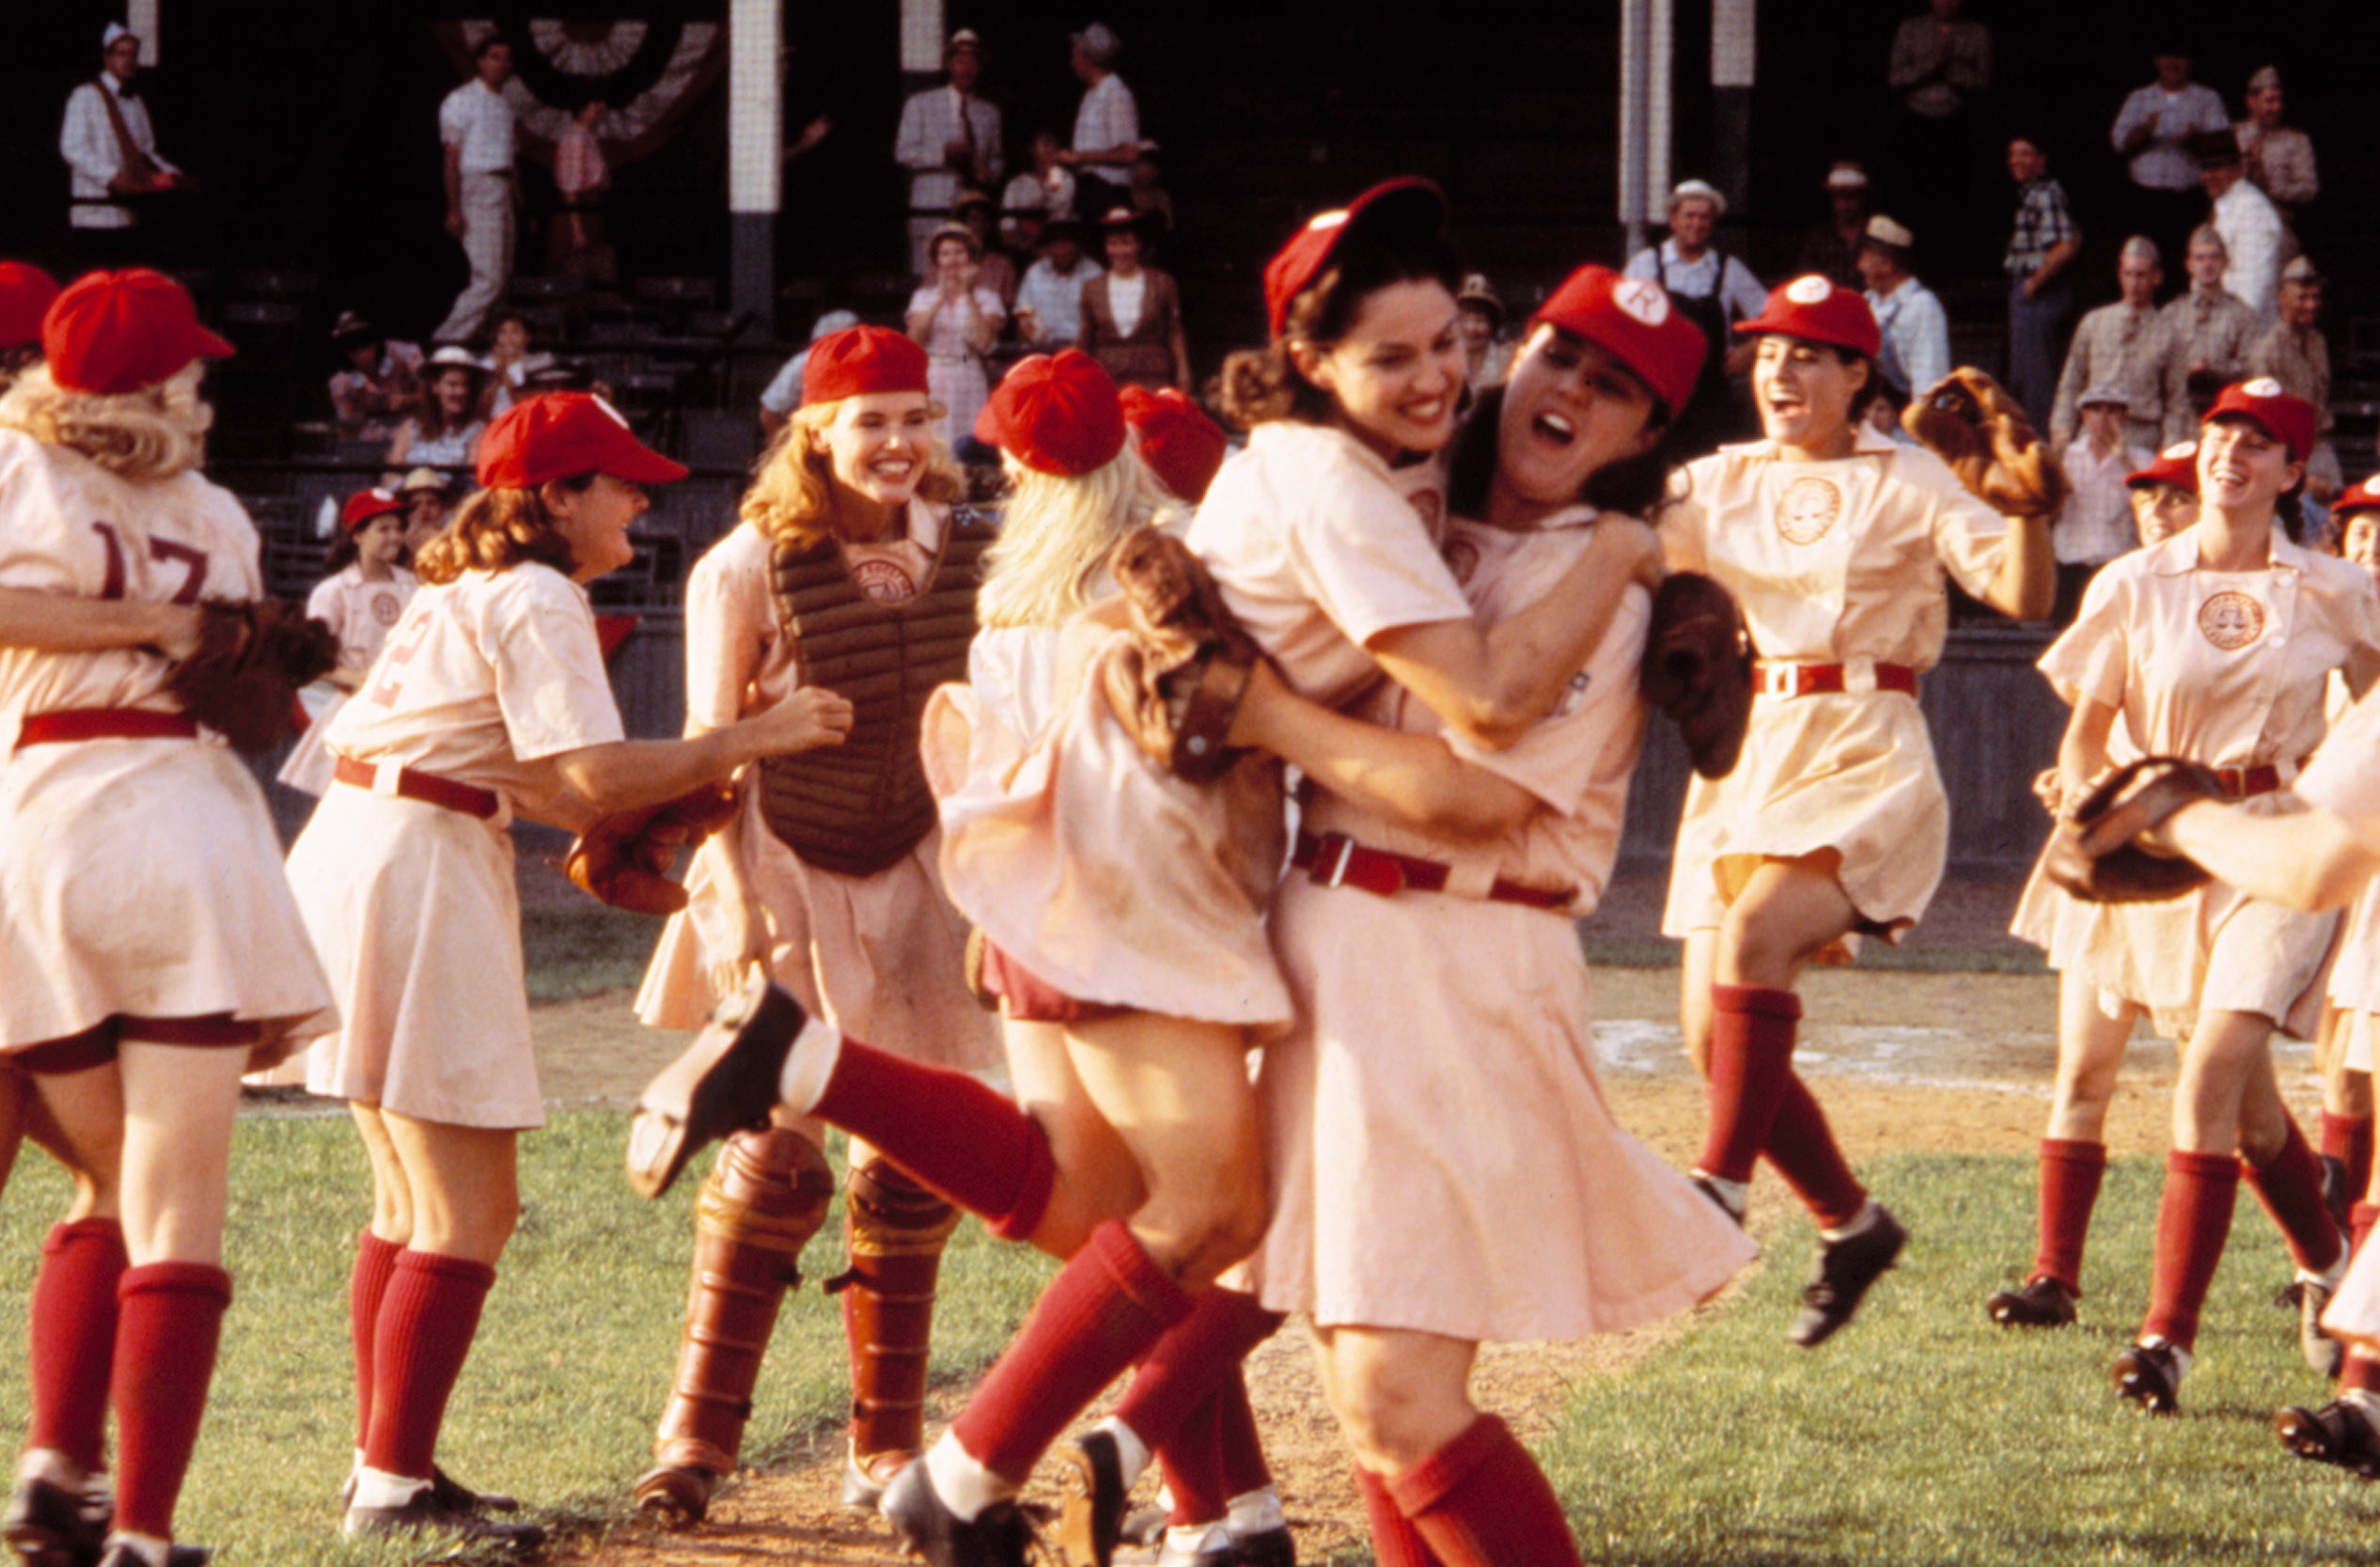 Women baseball players celebrating on the field, with Madonna and Rosie O&#x27;Donnell hugging